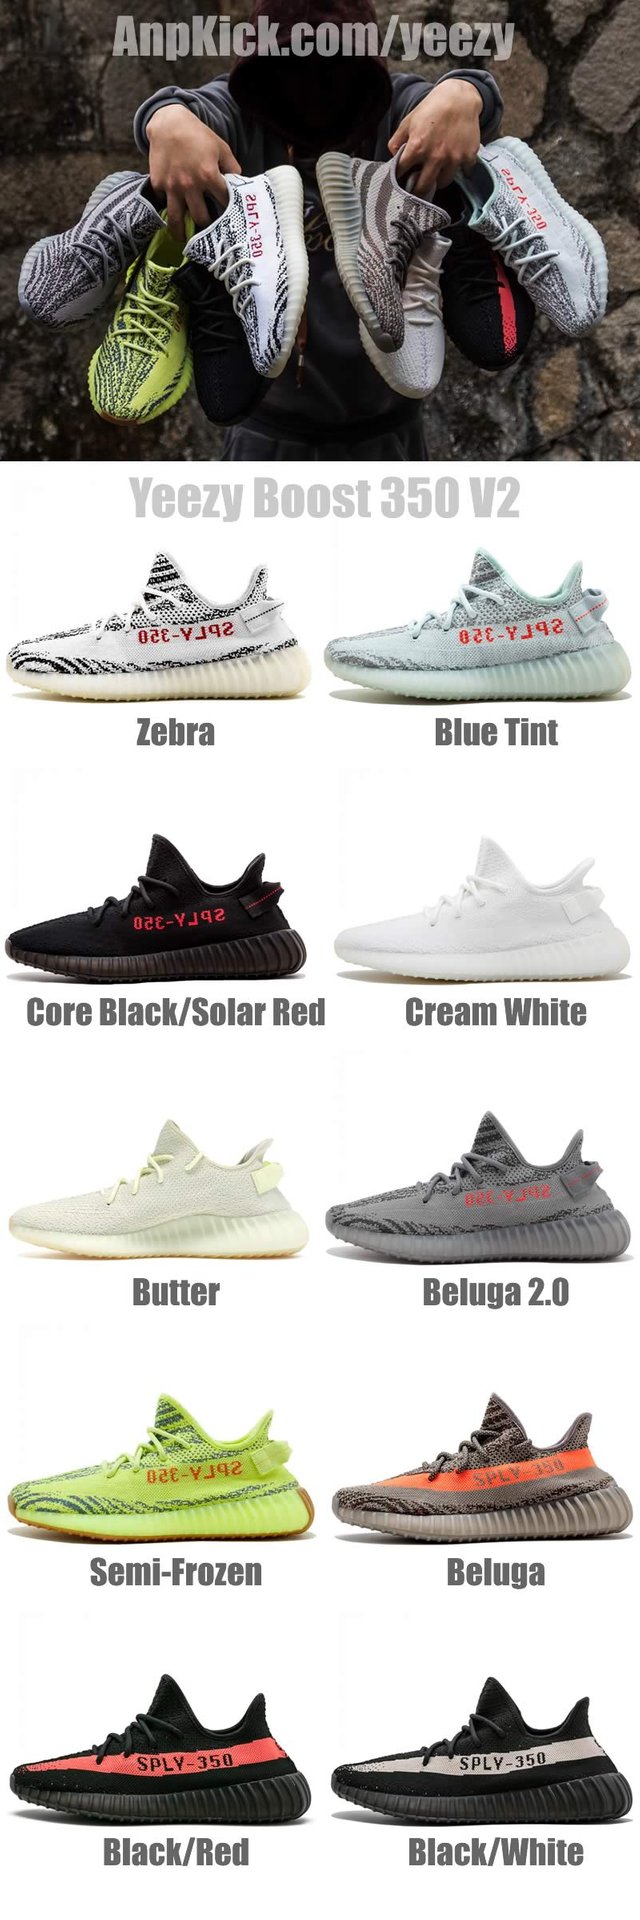 best place to buy yeezys online